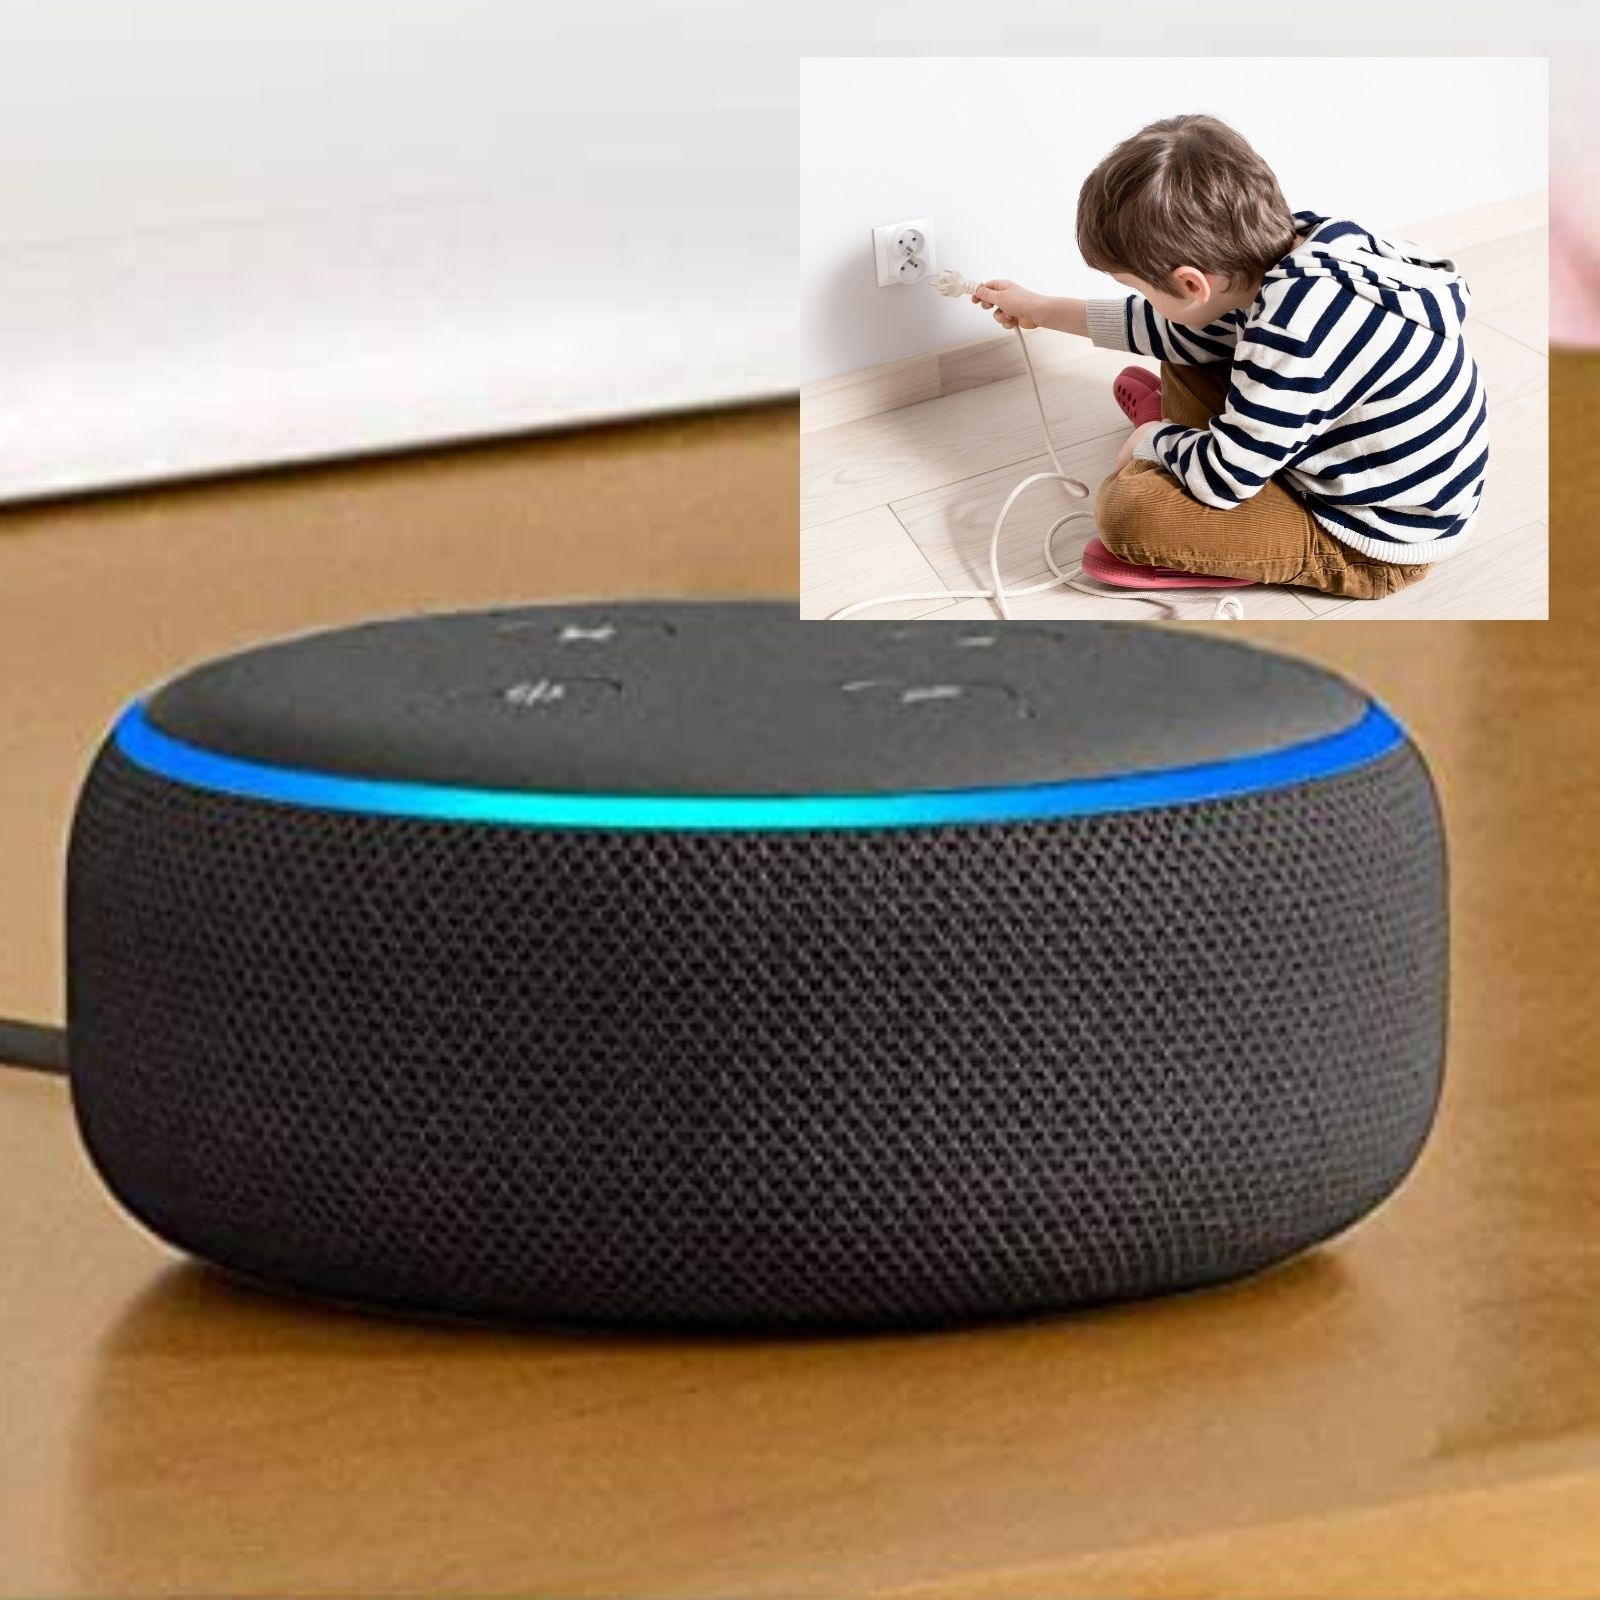 Alexa Asks 10-year-old to Do Deadly Challenge', Triggers Tweet War on